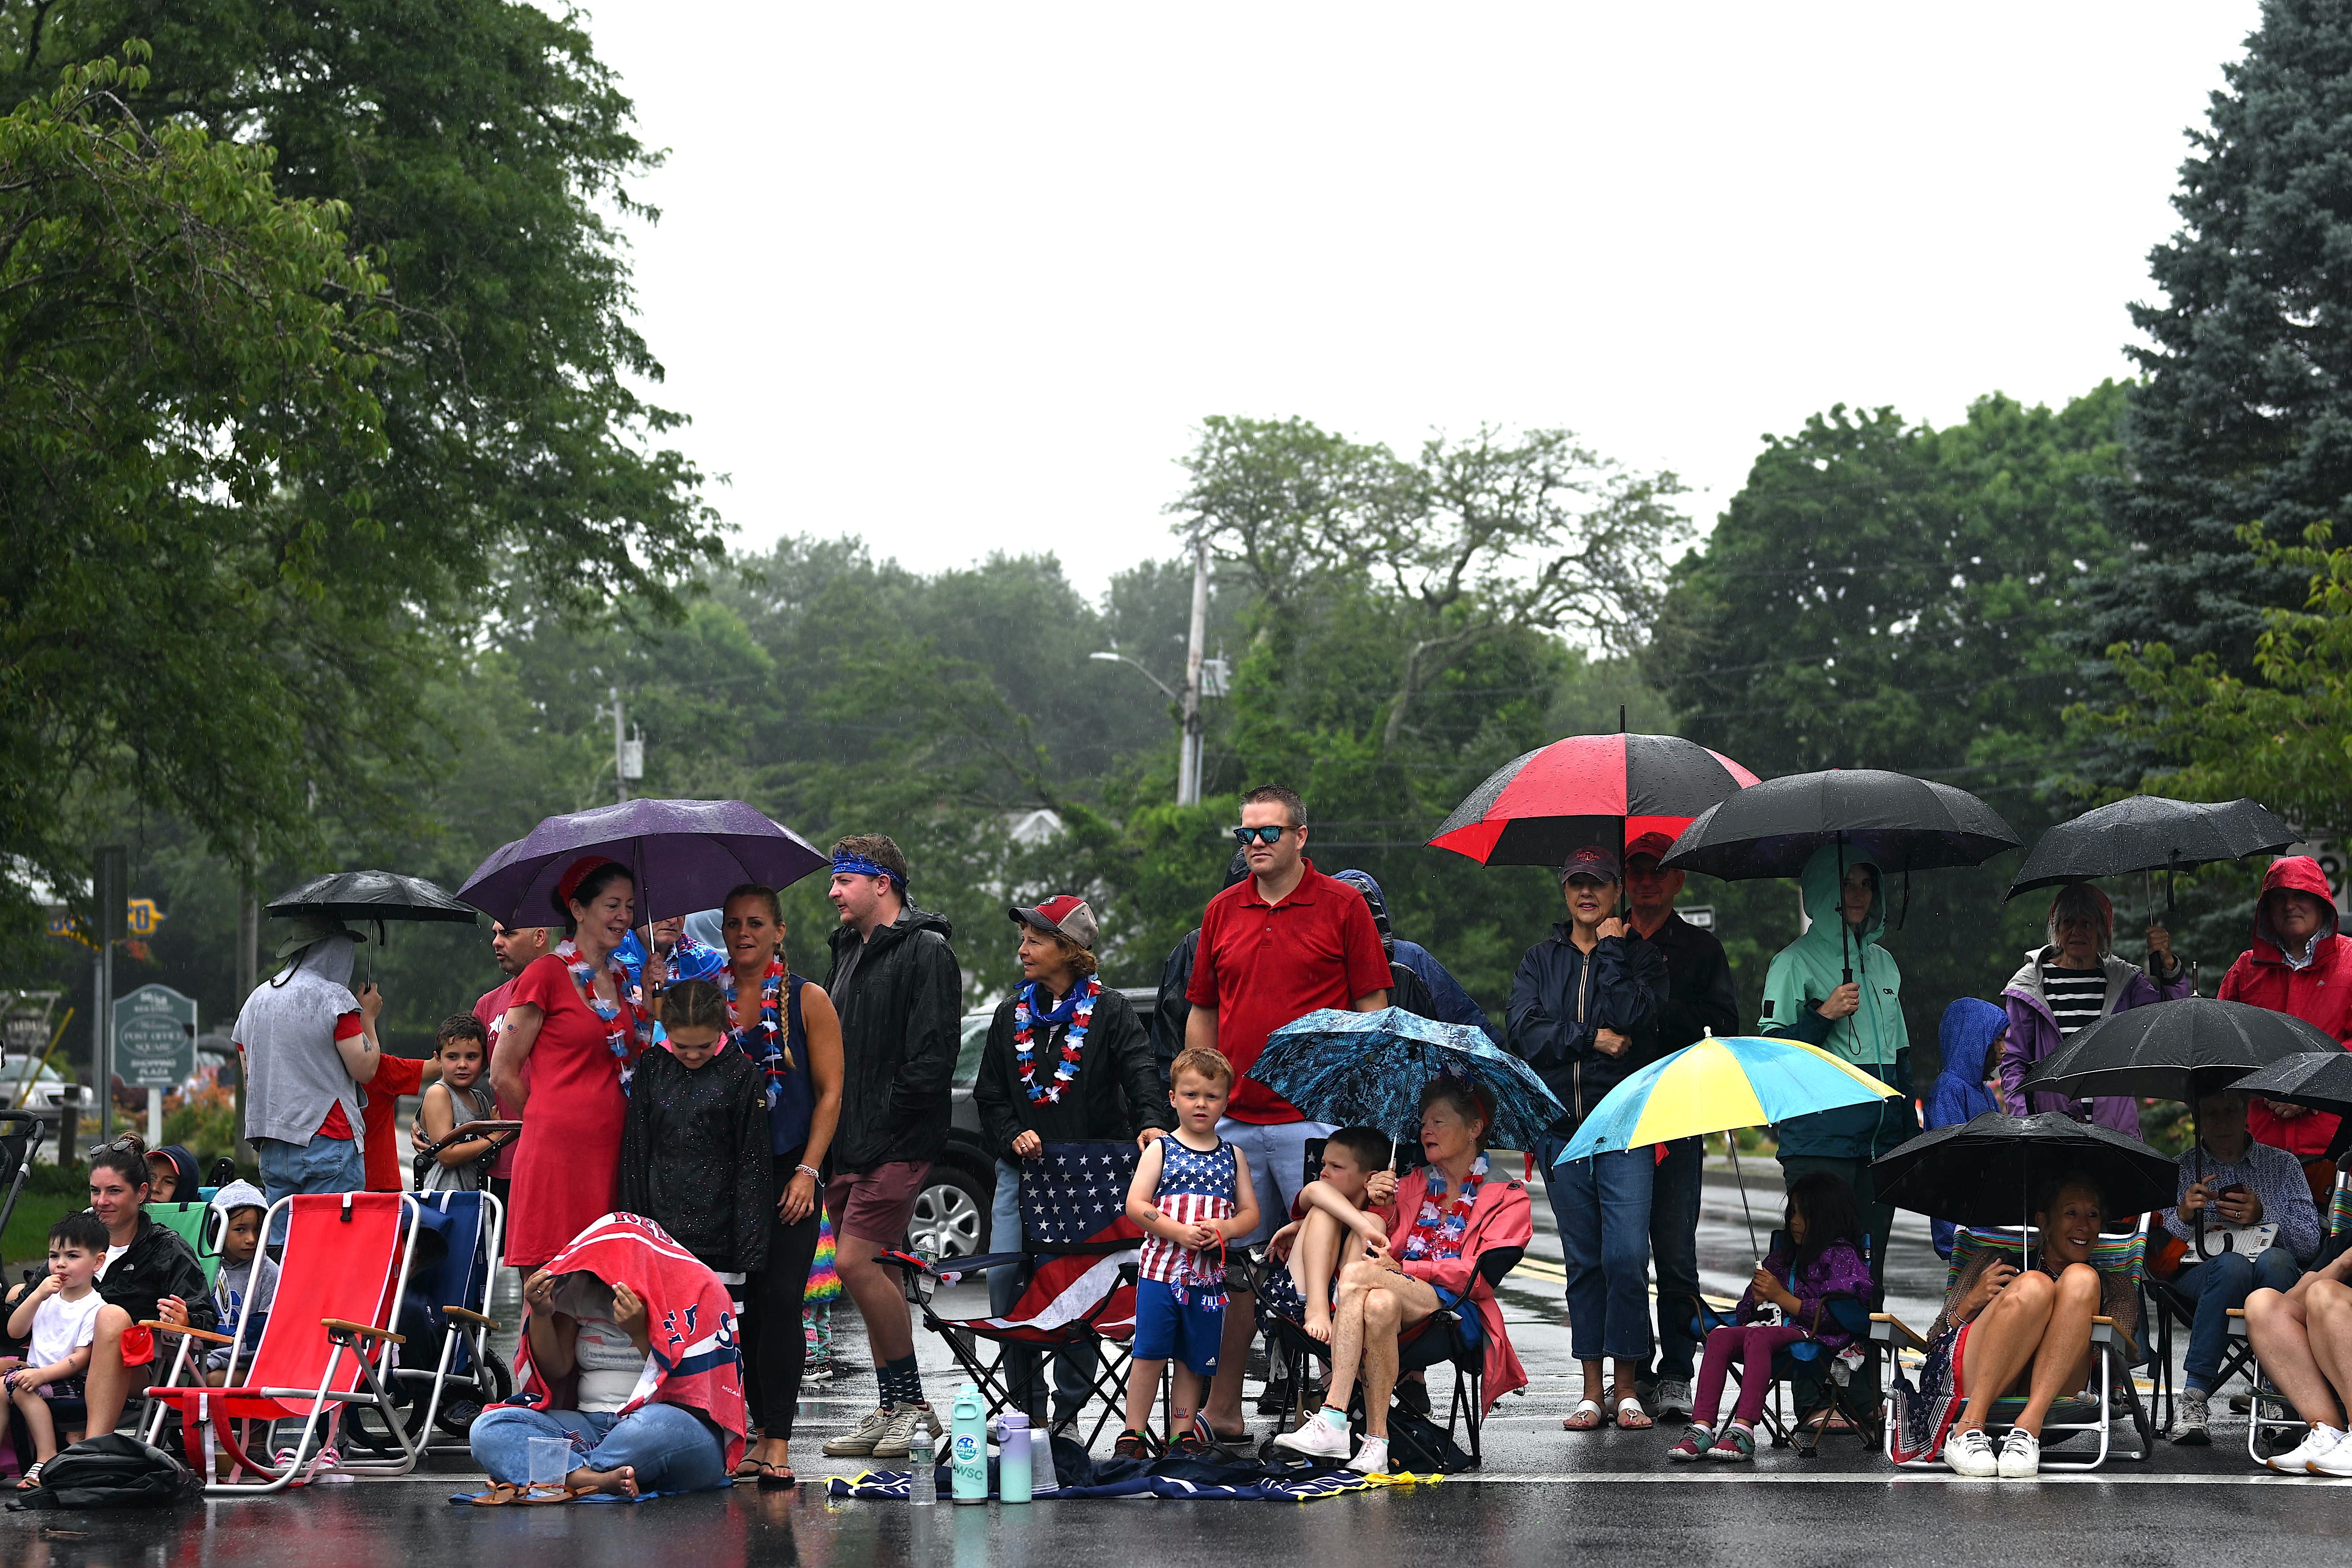 People huddle under umbrellas during a rainstorm before a Fourth of July parade in Cape Cod on July 4, 2023 in Orleans, Massachusetts. Today marks the 247th anniversary of the United States' Declaration of Independence from England. 